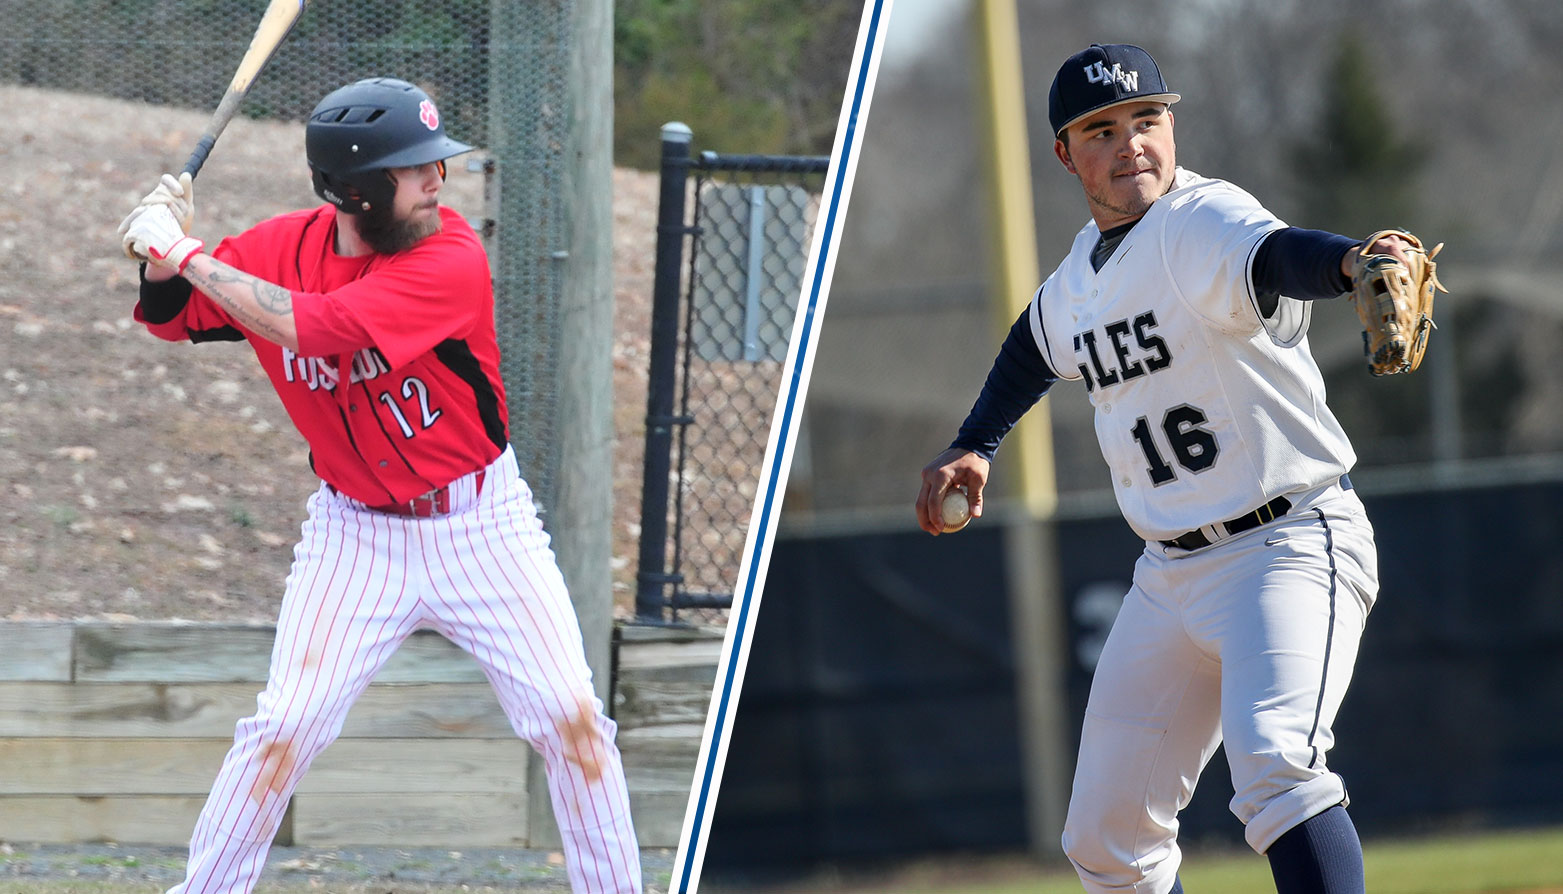 Frostburg State's Tre D'Amico & Mary Washington's Robert Cross Garner CAC Baseball Player of the Week Recognition